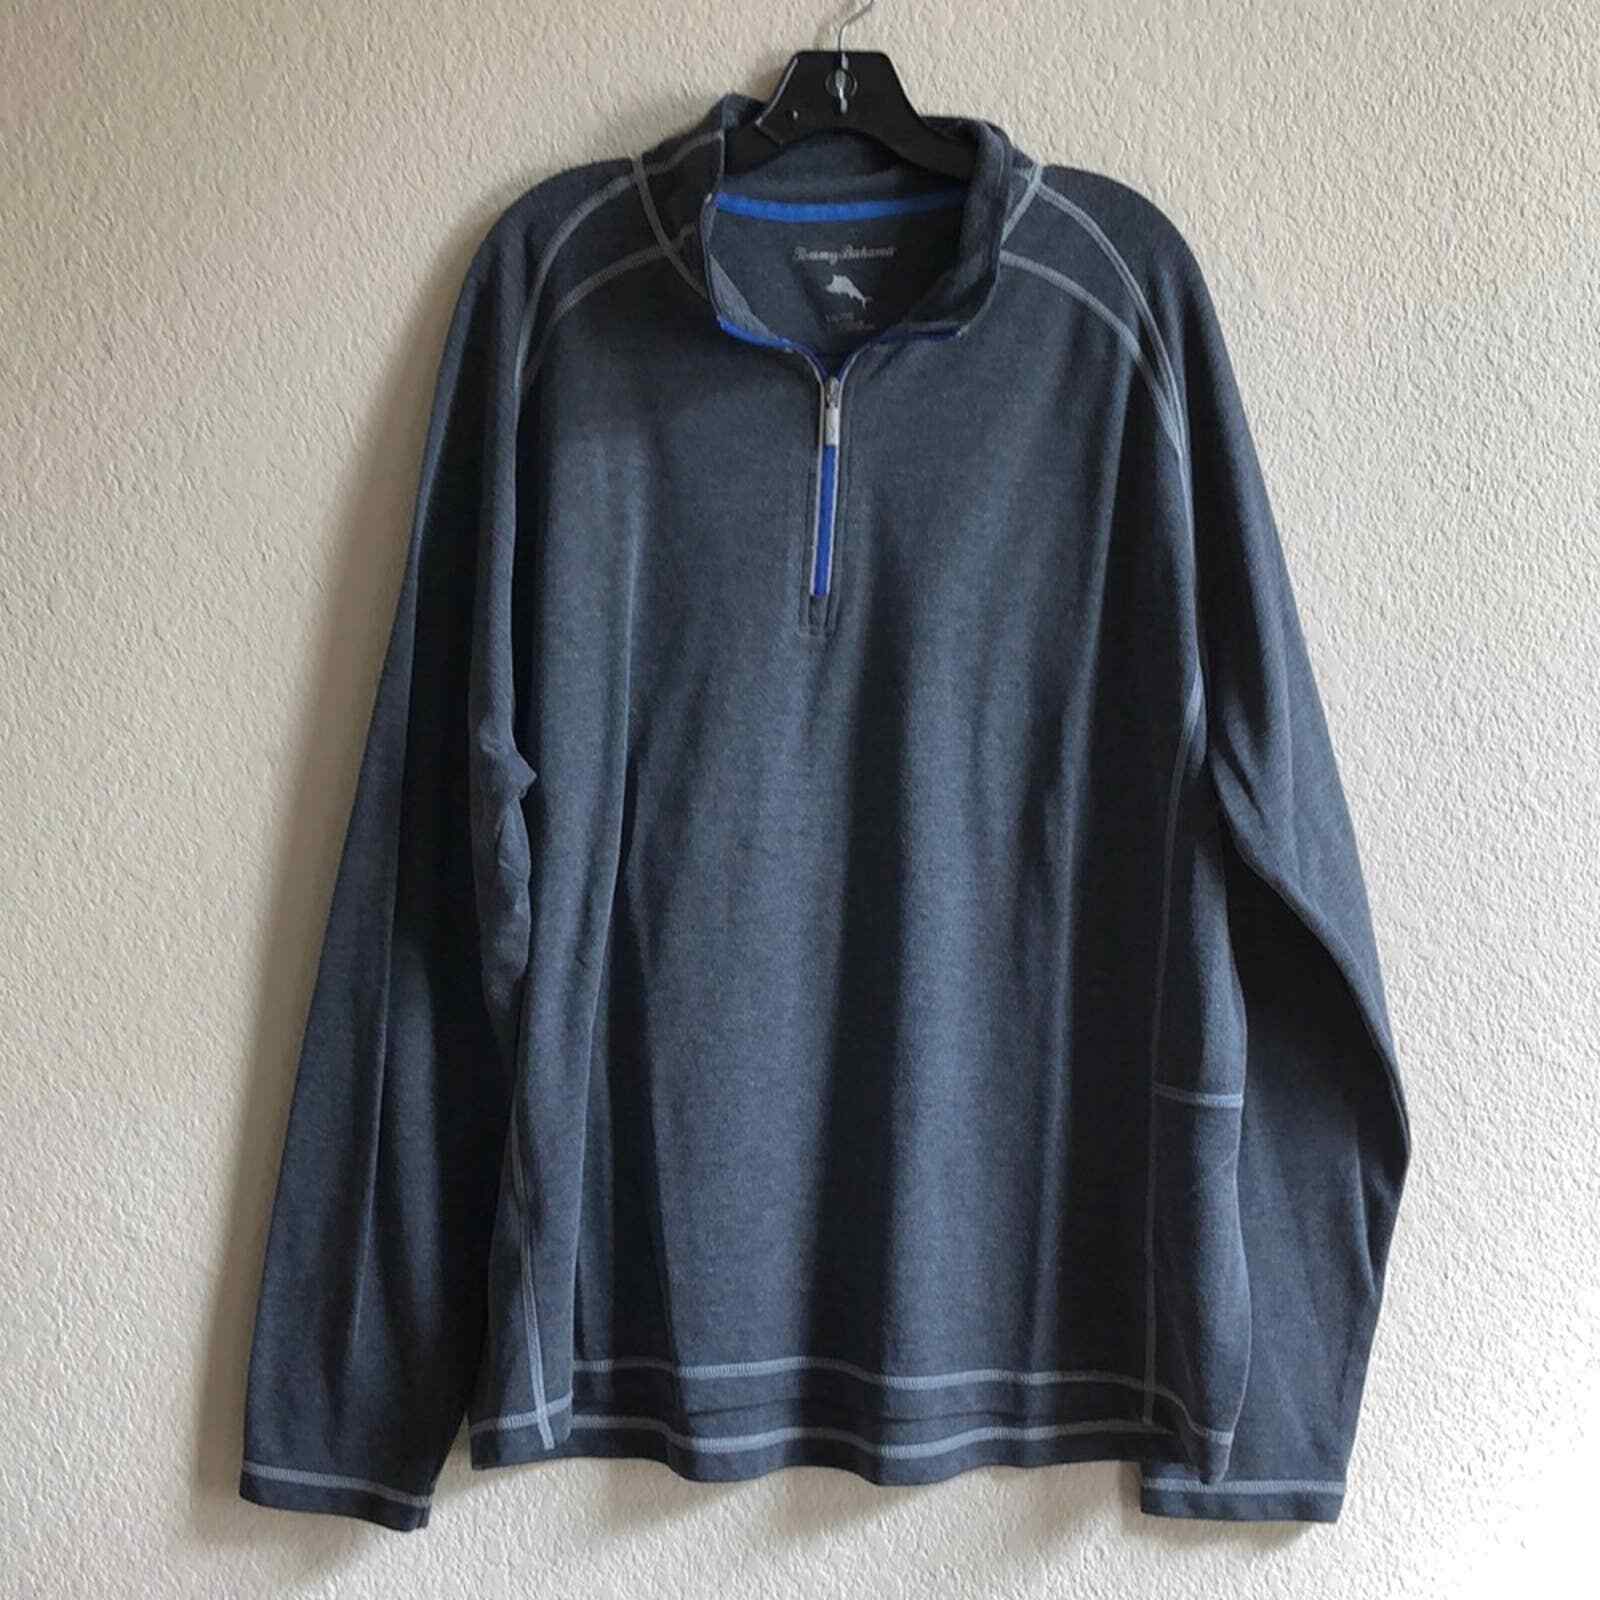 Primary image for Tommy Bahama Men’s Size XXL Gray Quarter 1/4 Zip Sweater Pullover